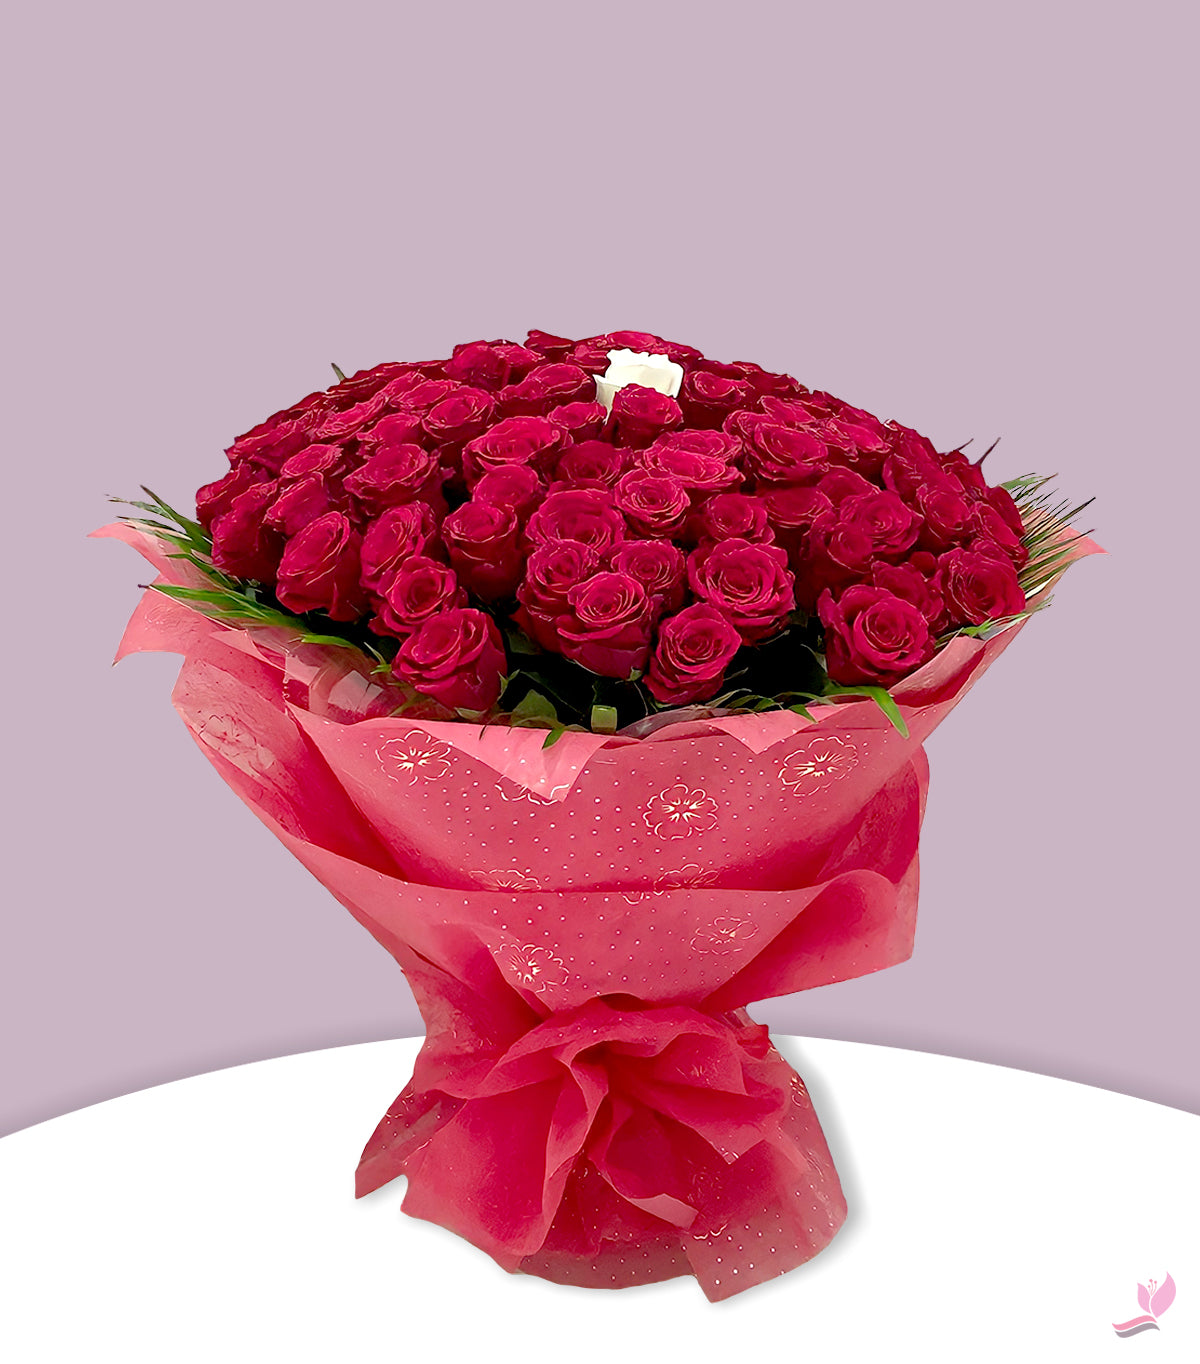 Bouquet Of 99 Red Roses And A Single White Rose In A Nice Red Wrapping